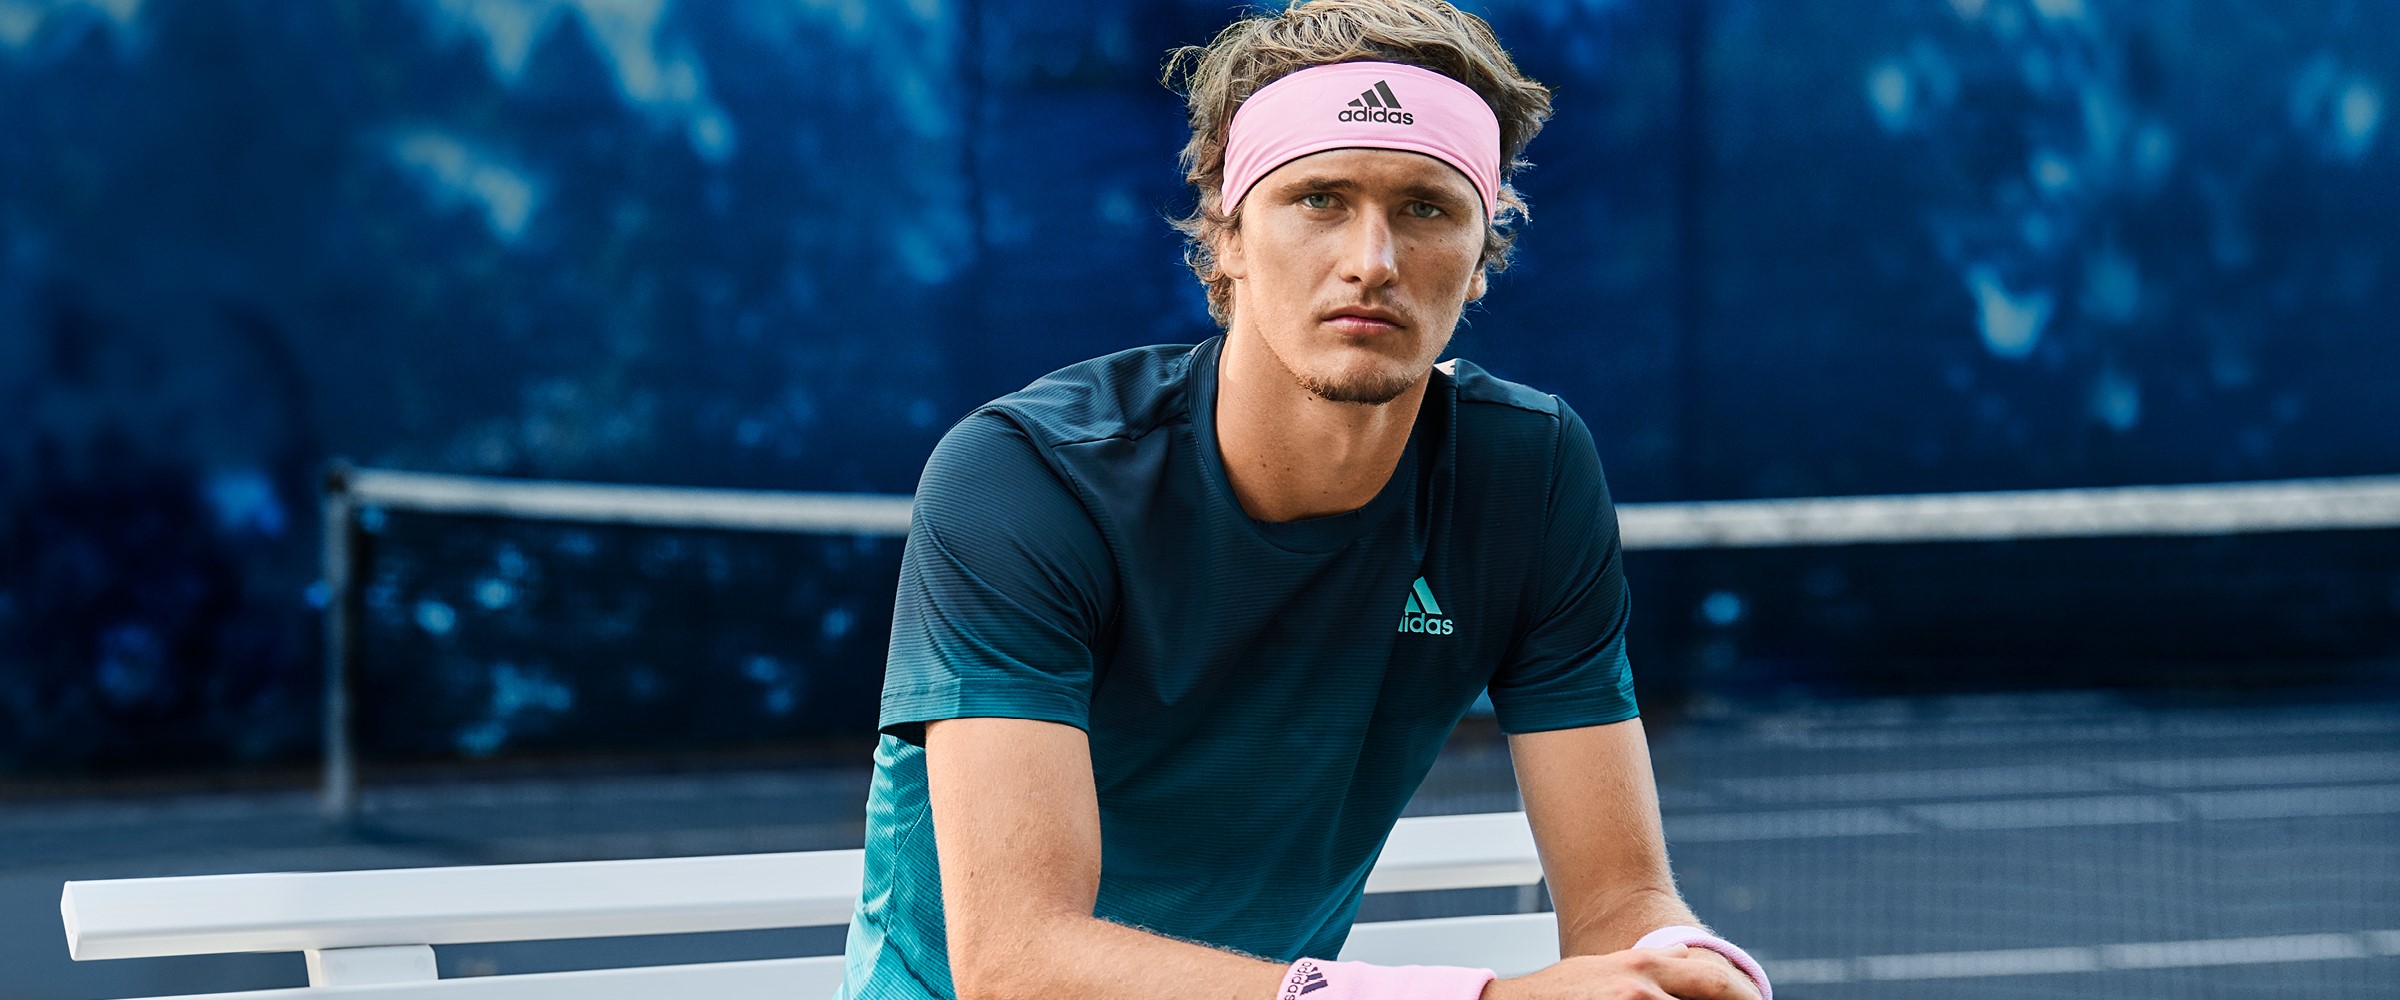 adidas zverev outfit